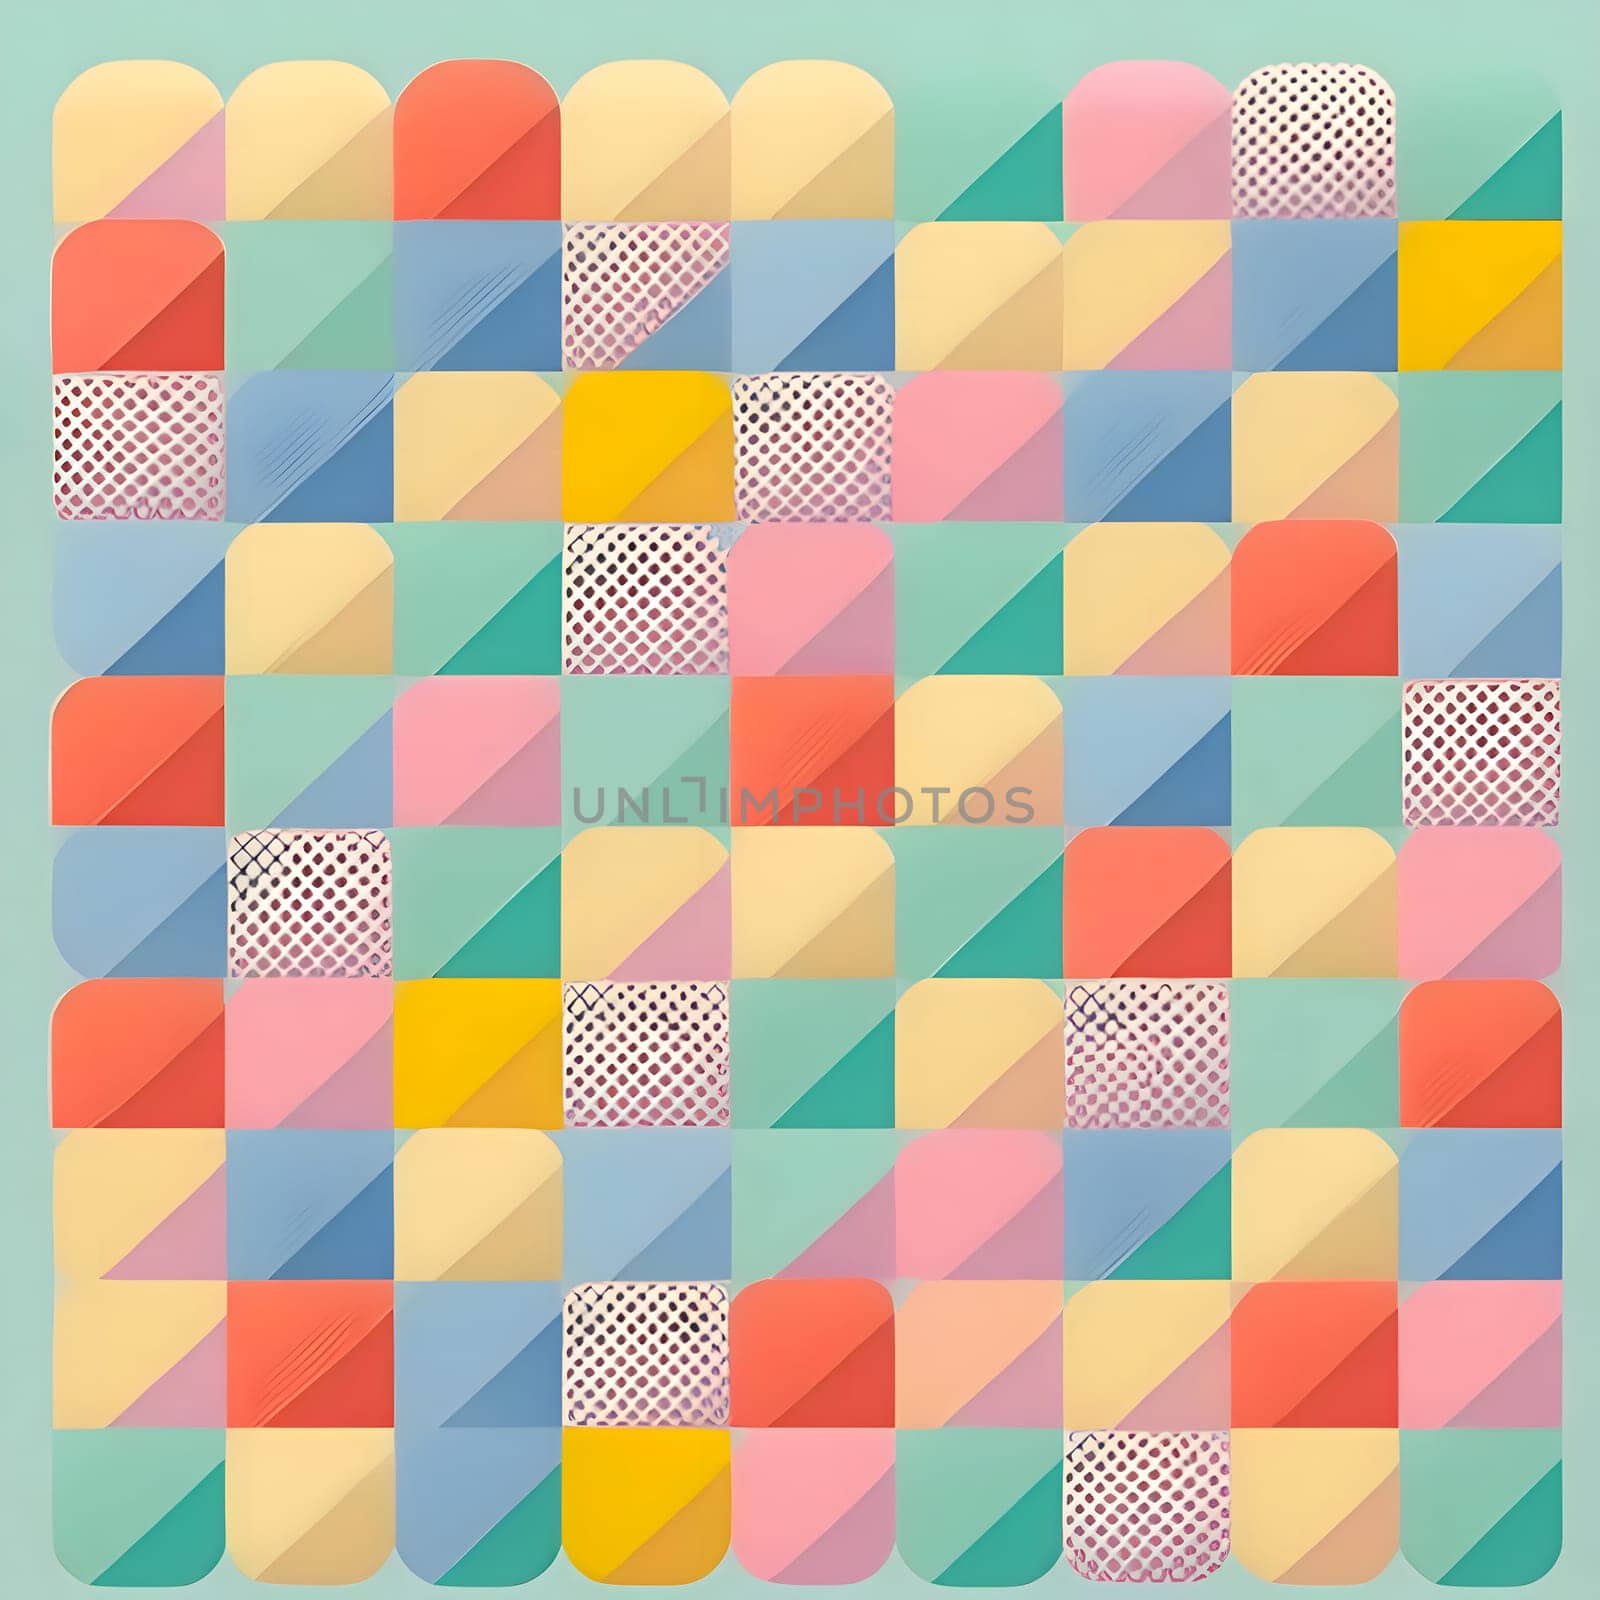 Patterns and banners backgrounds: Abstract background with geometric pattern in retro style. Vector illustration for your design